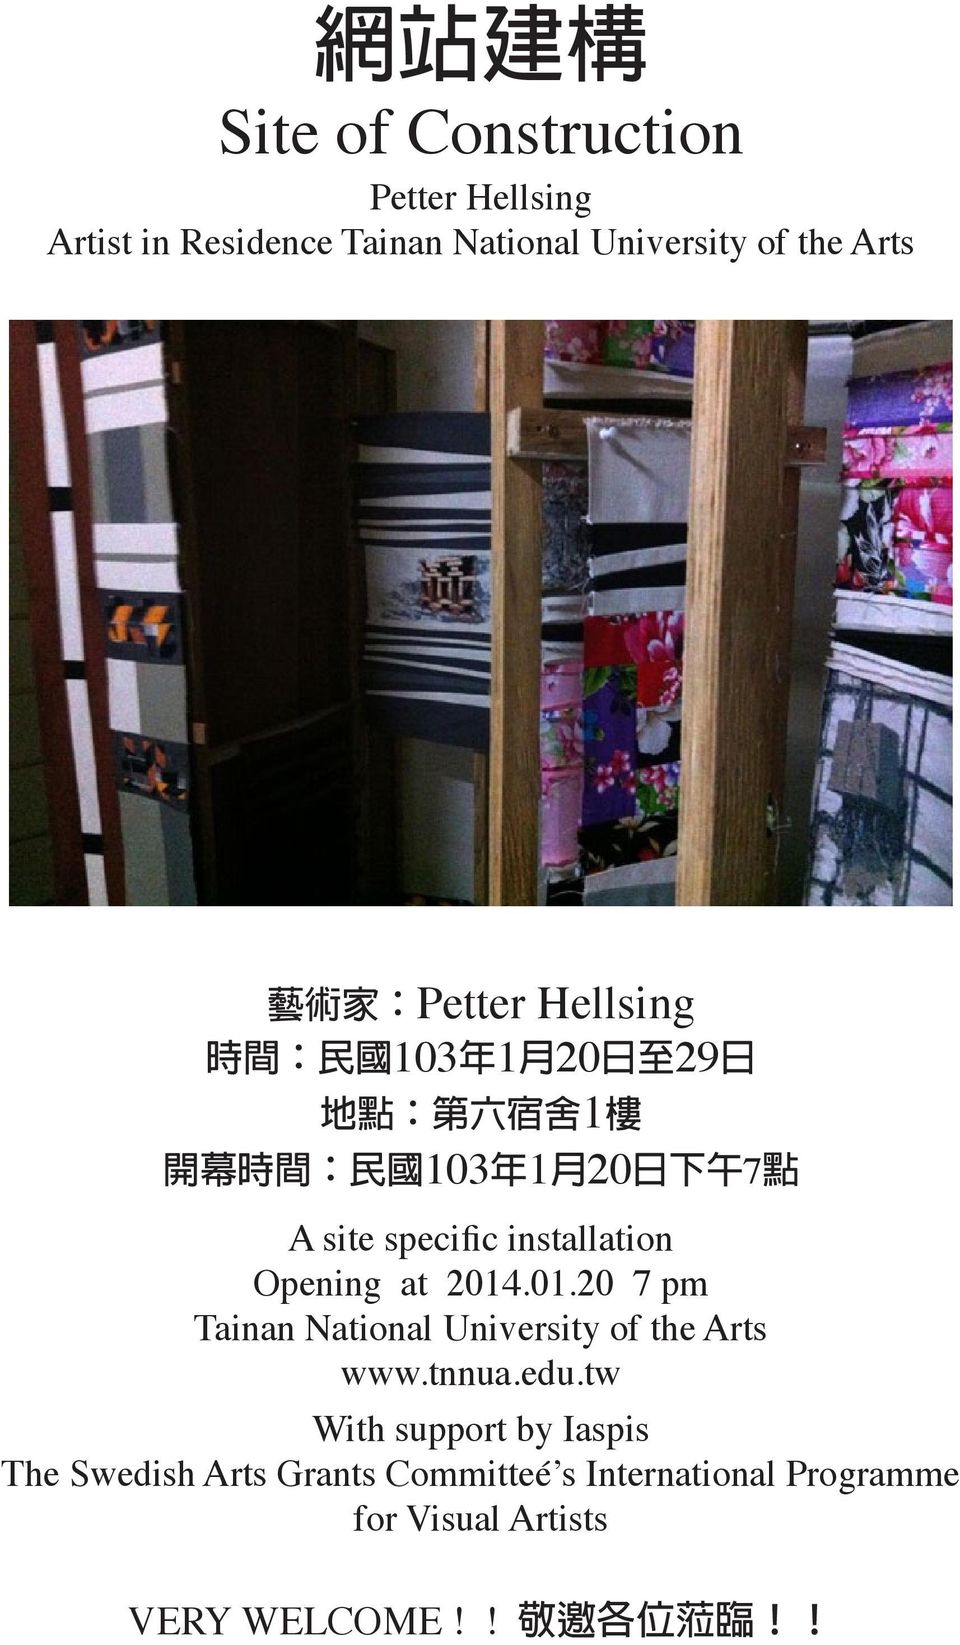 specific installation Opening at 2014.01.20 7 pm Tainan National University of the Arts www.tnnua.edu.